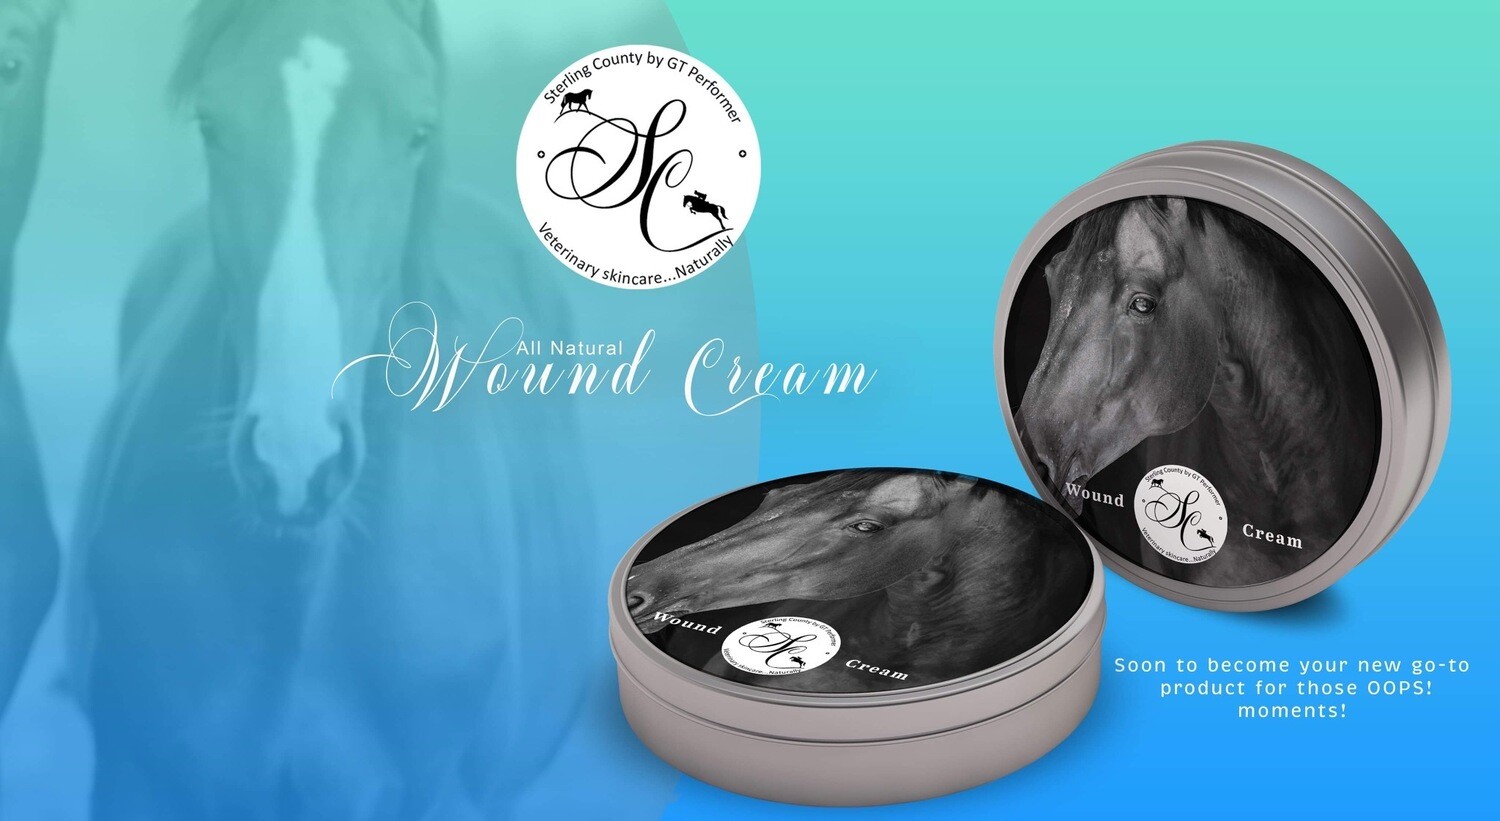 Sterling County by GT Performer Wound cream